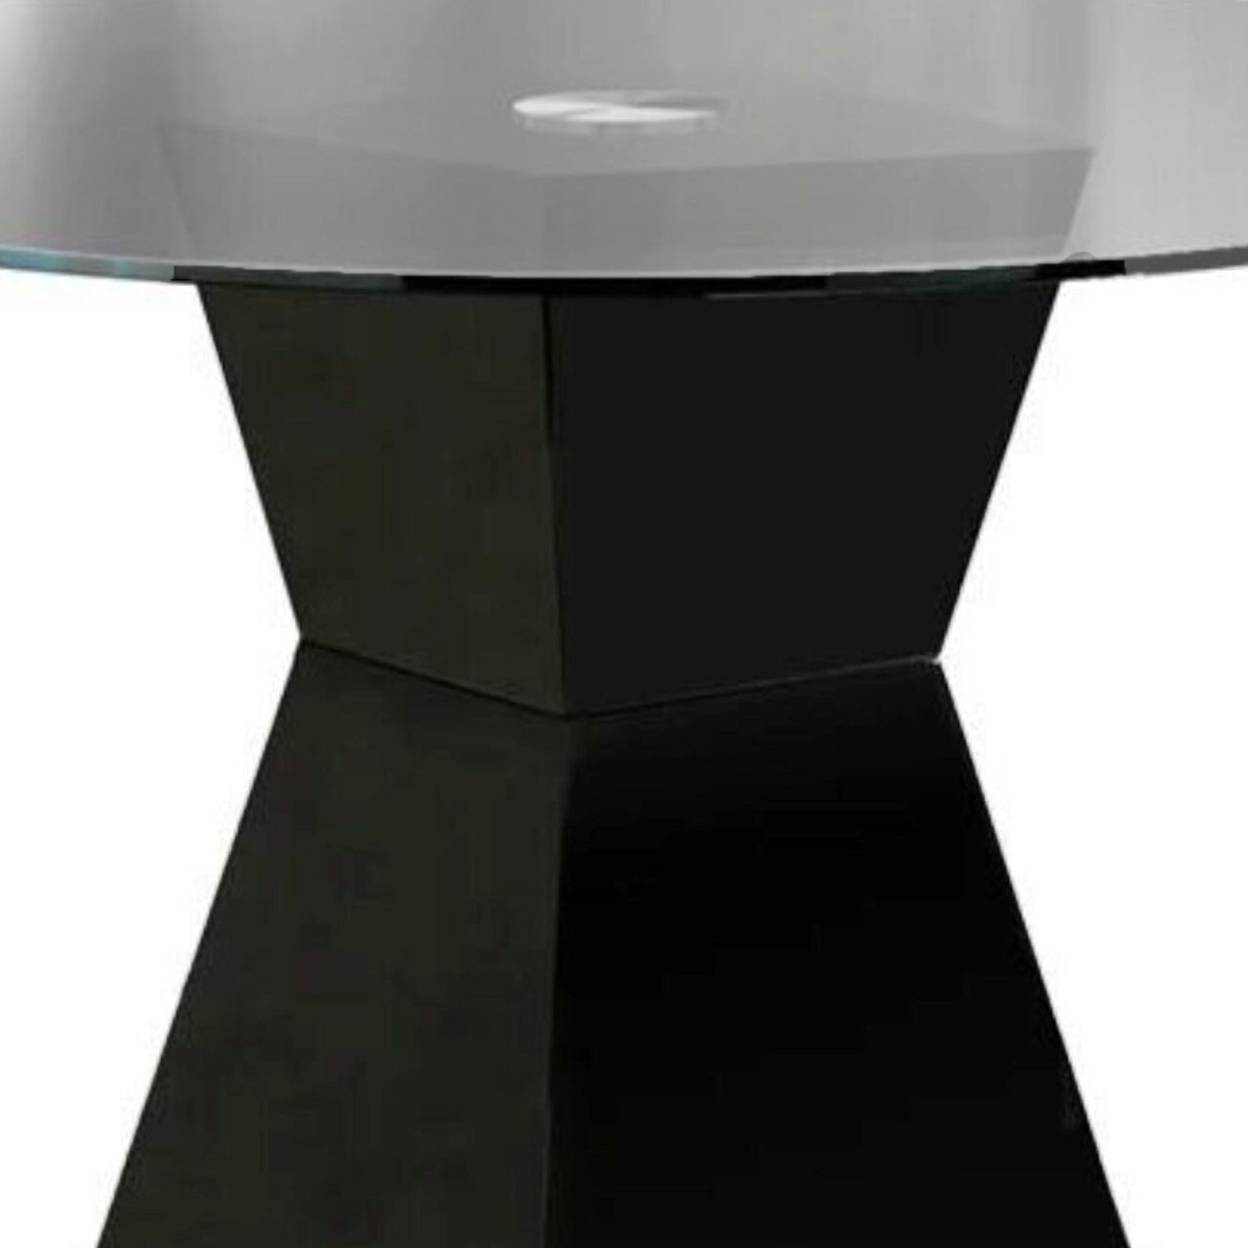 Contemporary Round Glass Dining Table With Square Pedestal Base, Black- Saltoro Sherpi